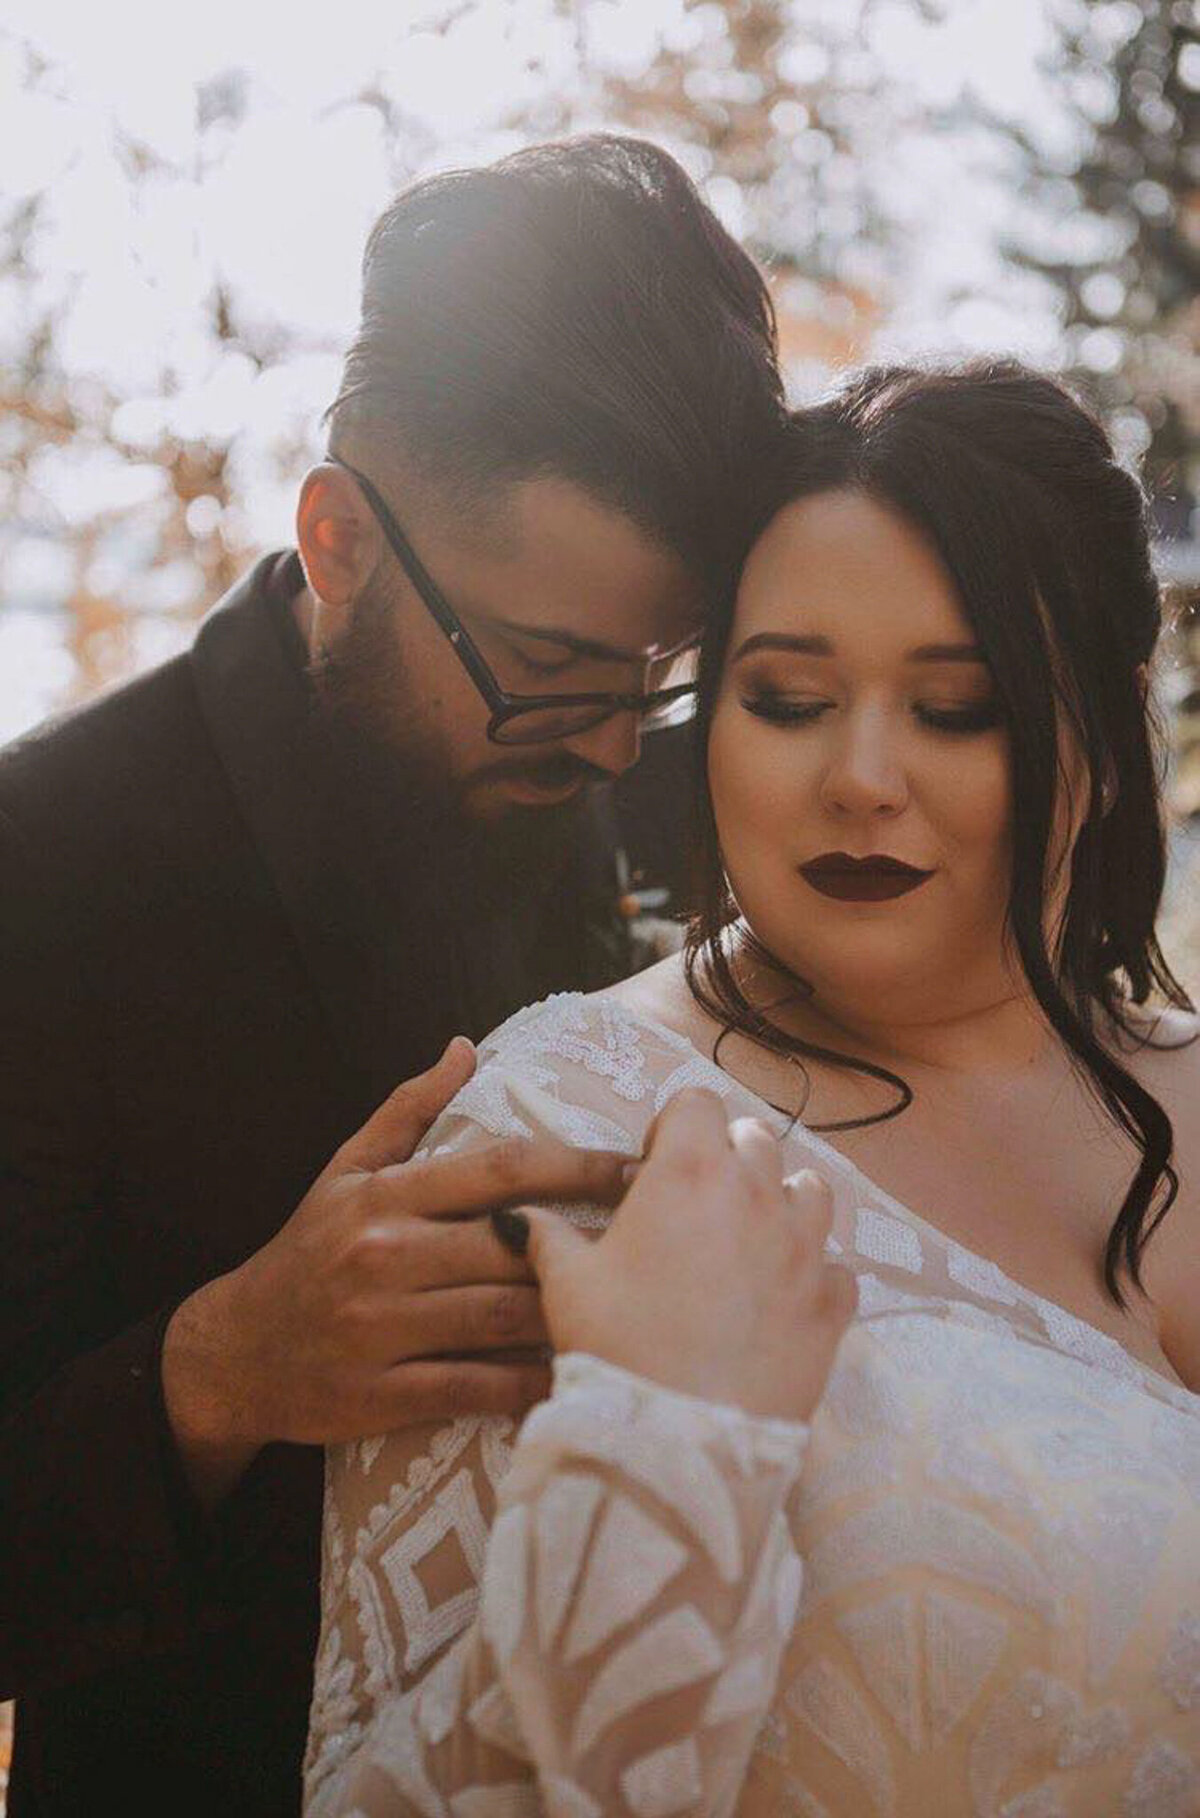 Classic and romantic hair and makeup by Madi Leigh Artistry, experienced and inclusive Calgary hair & makeup artist, featured on the Brontë Bride Vendor Guide.